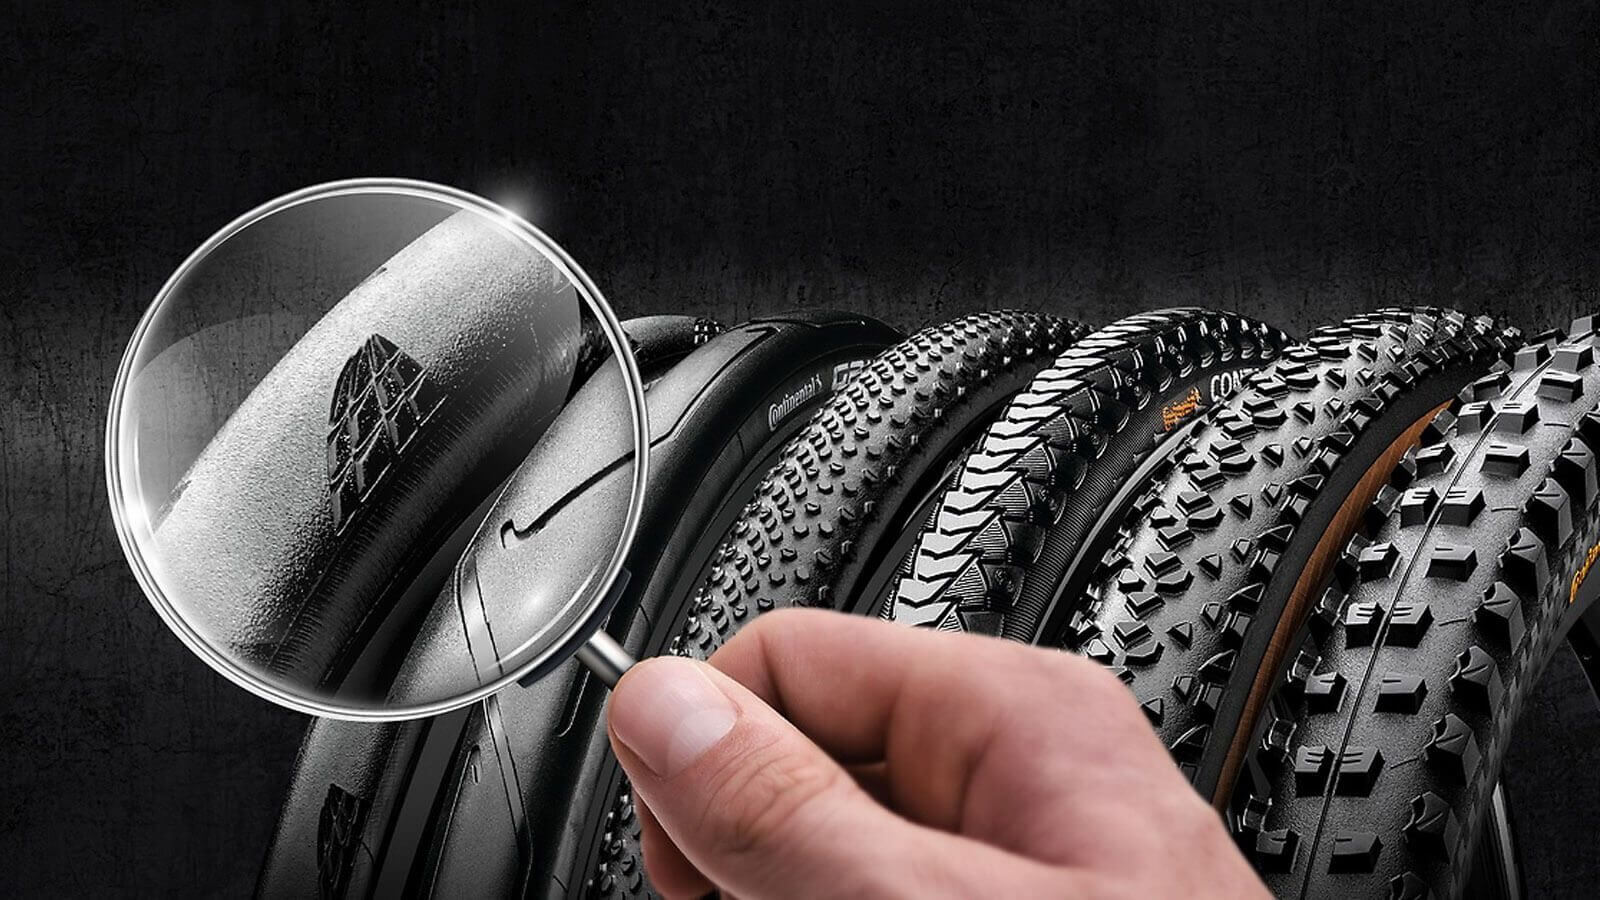 The Best Strategy to Buying New Bike Tires in 2023